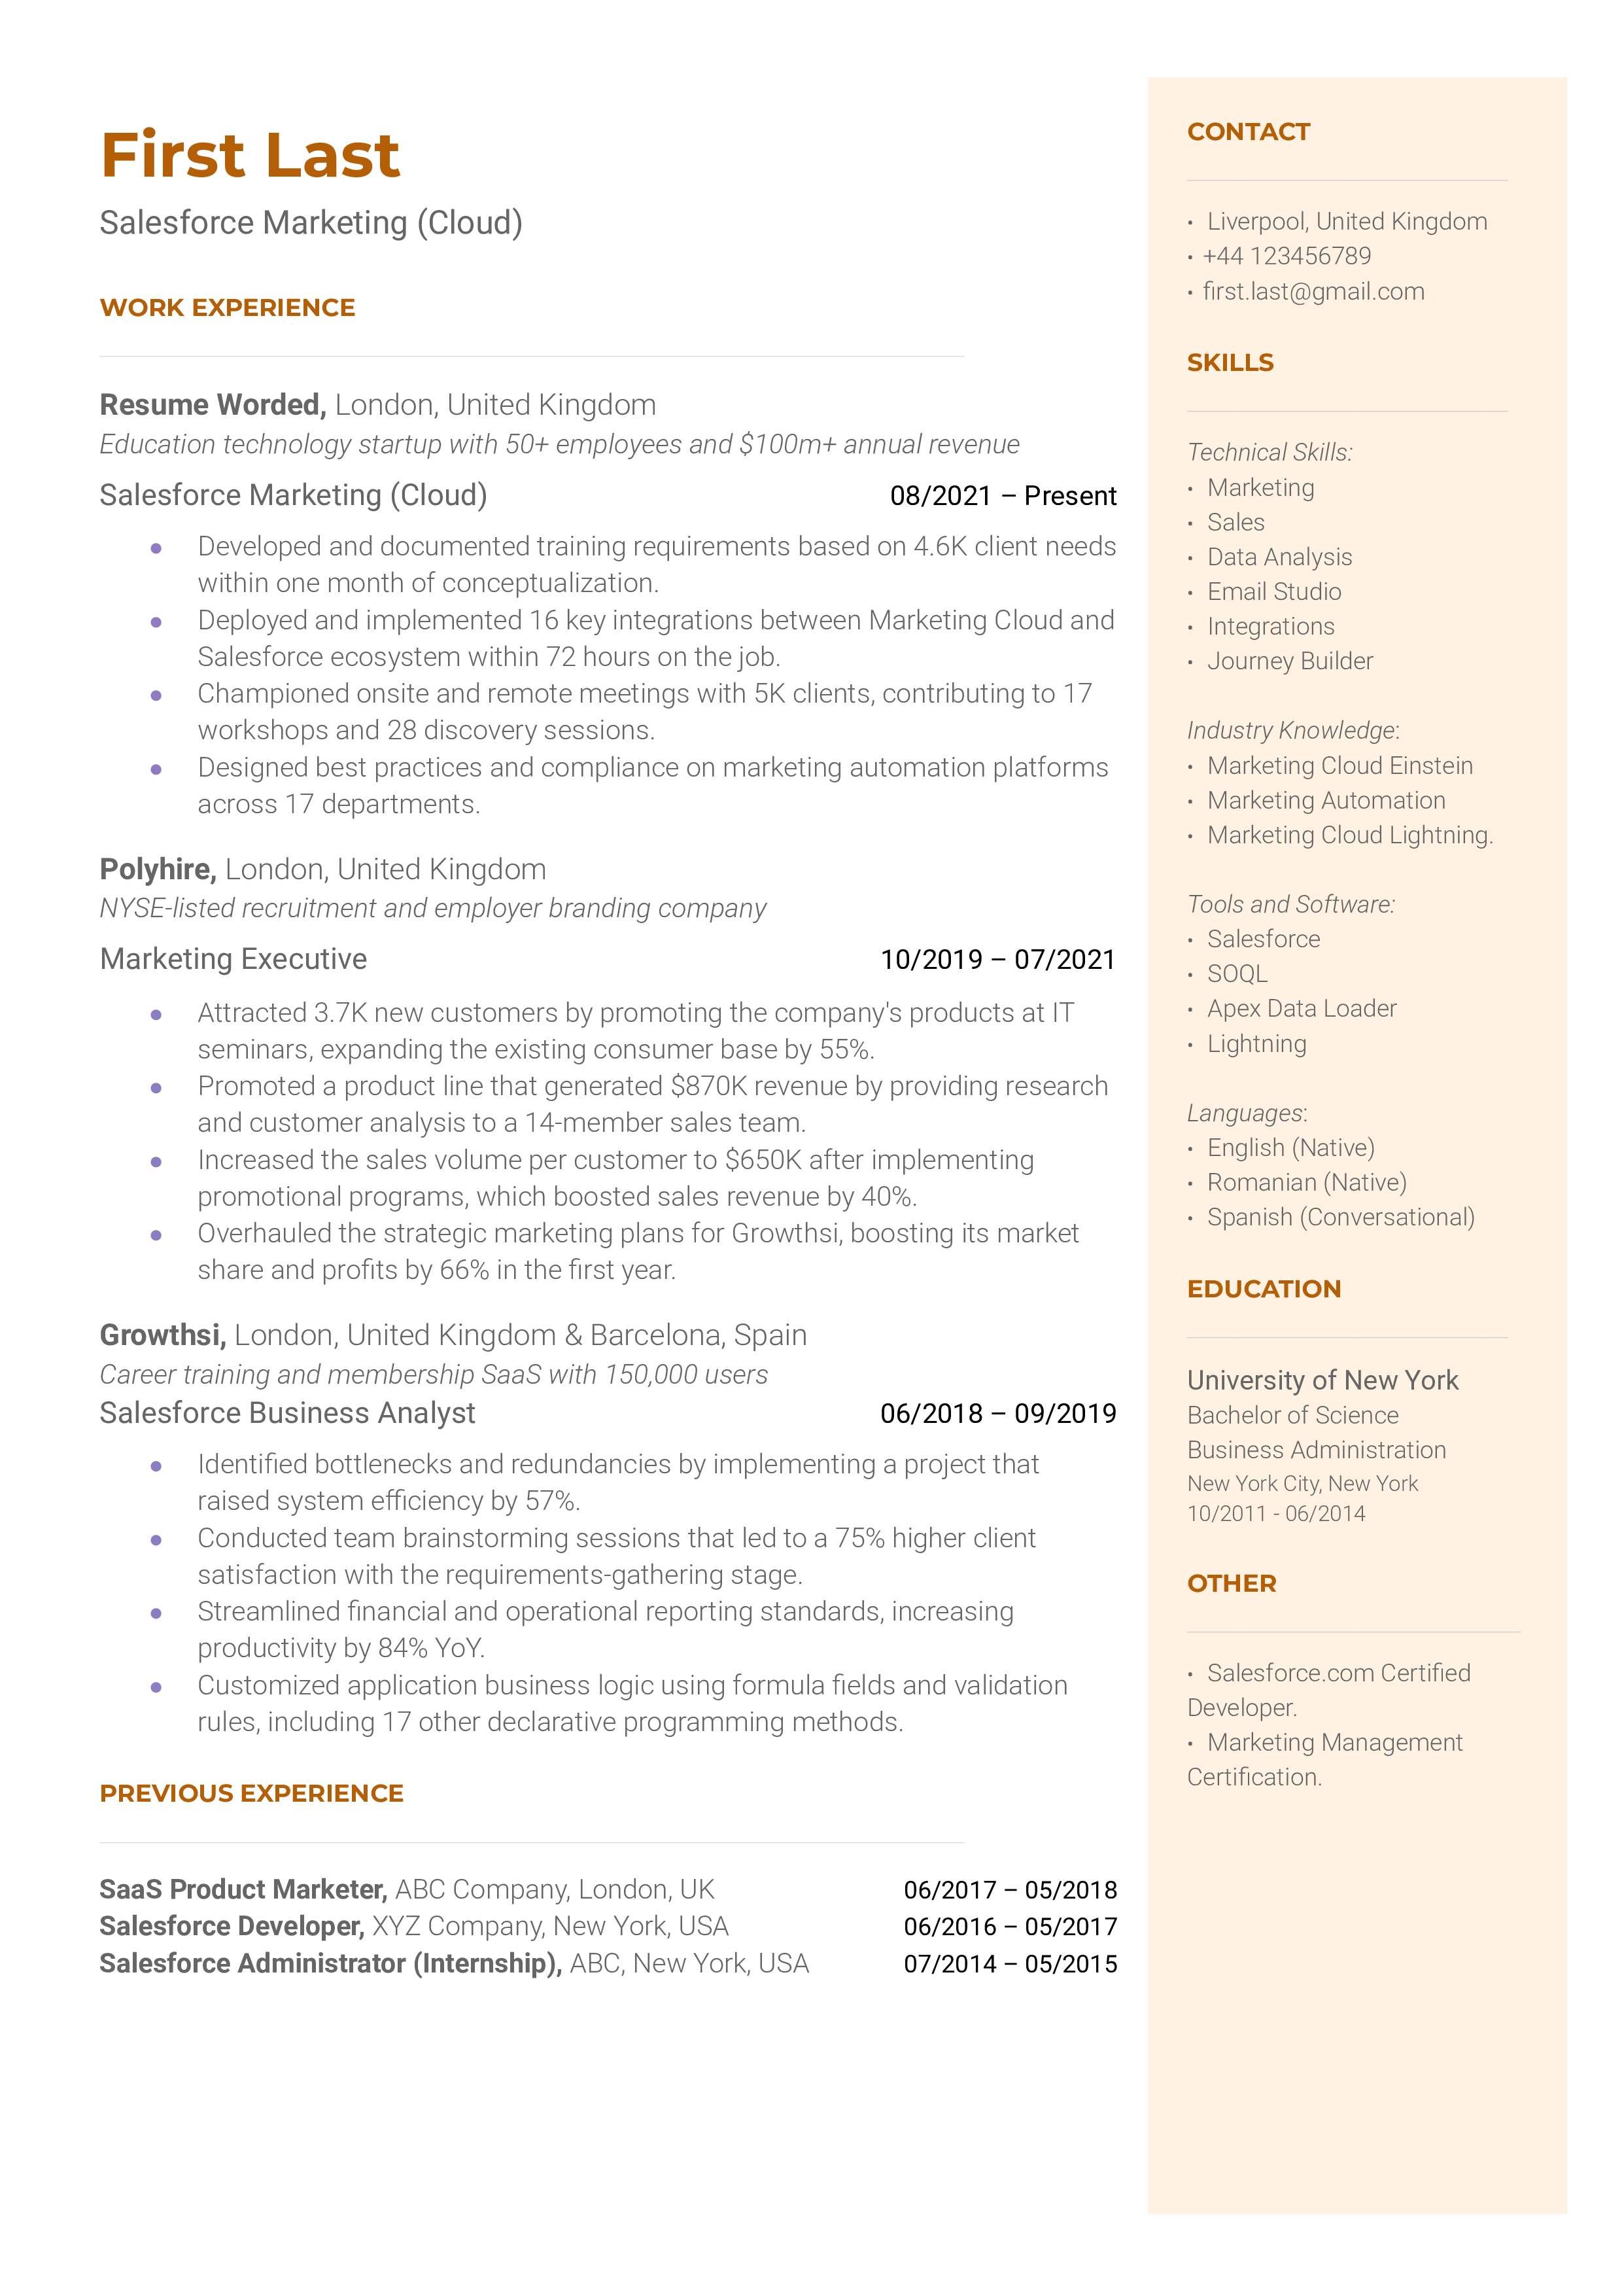 A Salesforce marketing cloud resume with work experience in Salesforce adminstration and business analytics, and a business degree.